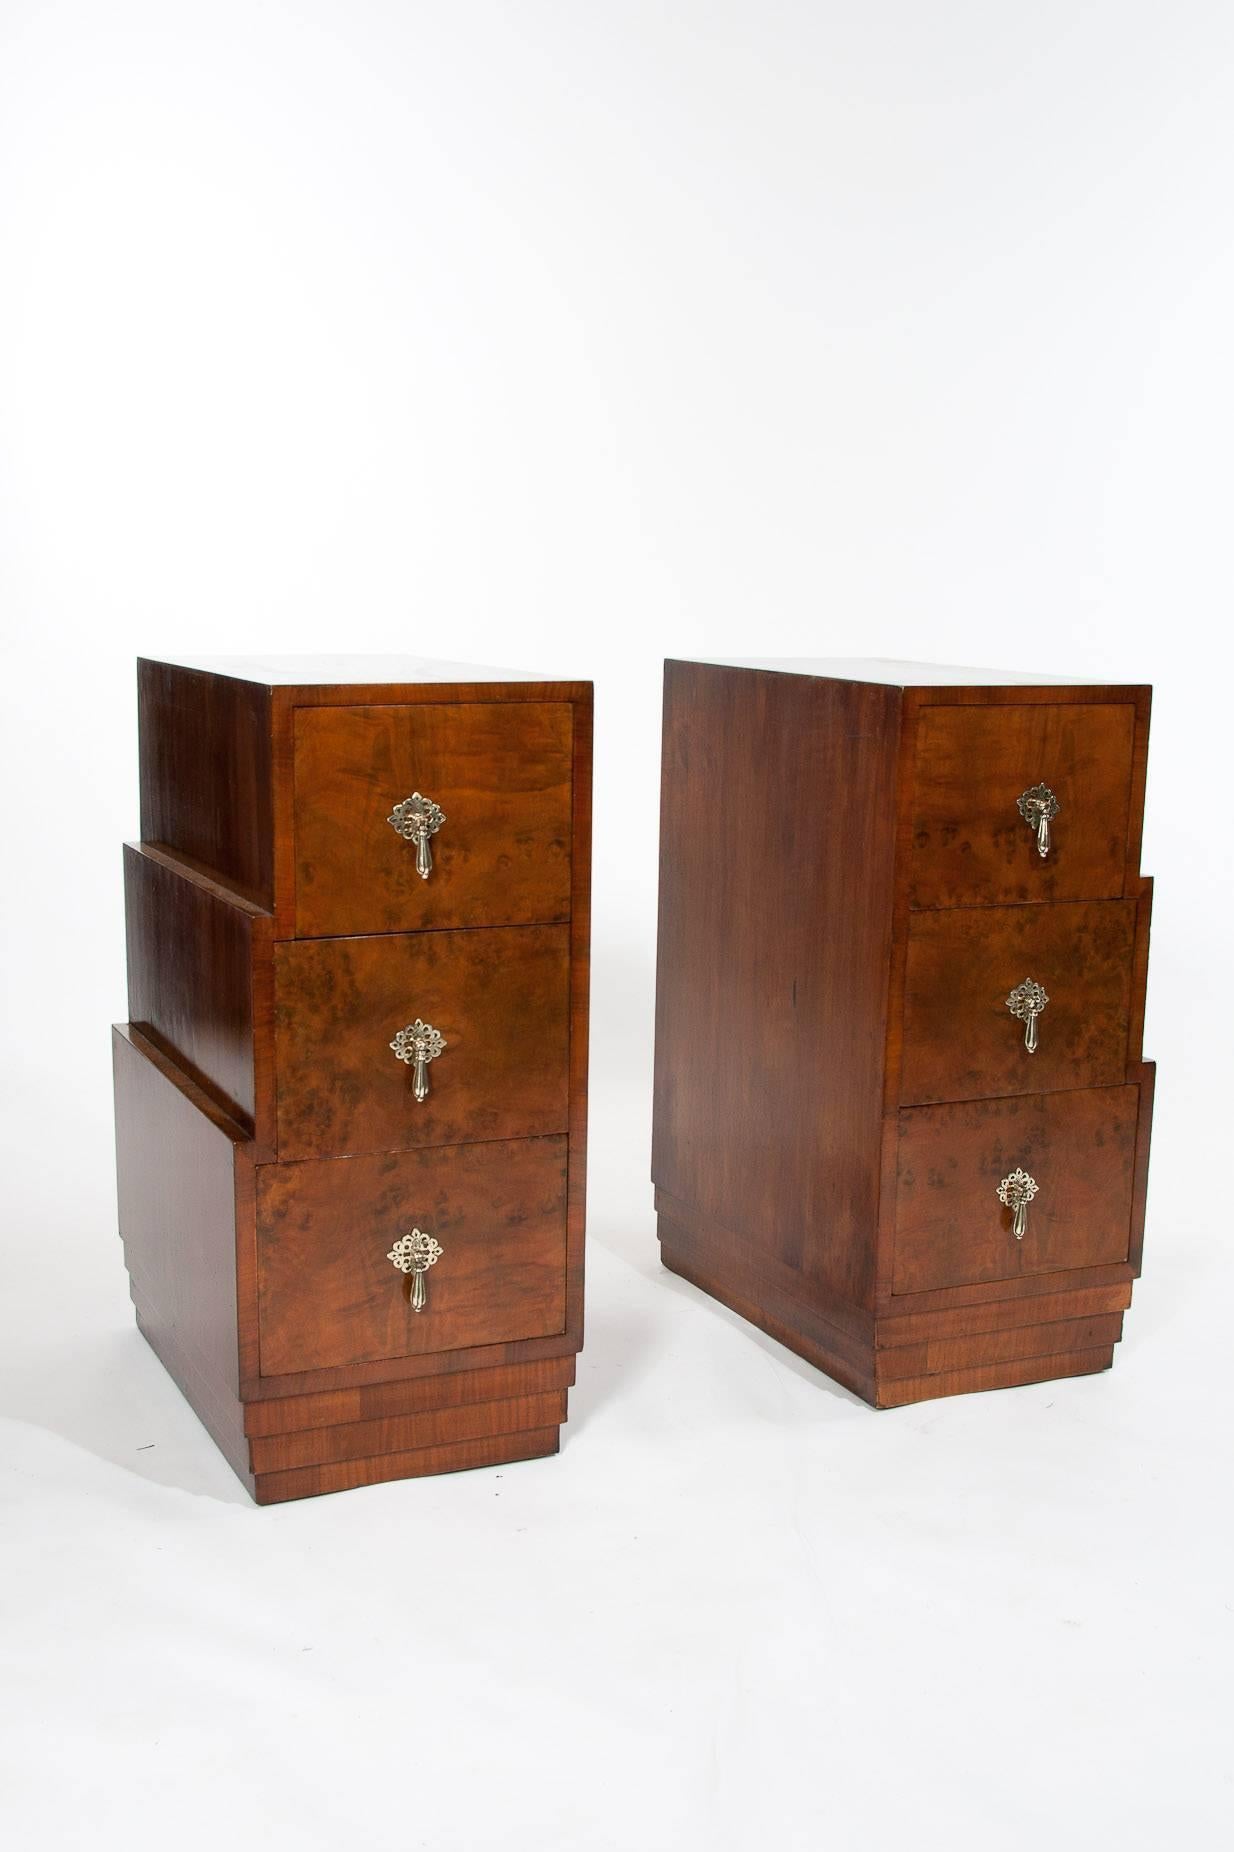 A pair of stepped Art Deco walnut bedside chests or cabinets. 

This quality pair of Art Deco bedside cabinets have a bookmatch veneered walnut top sitting over three stepped drawers graduating in size.

Each drawer having hand-cut dovetails and